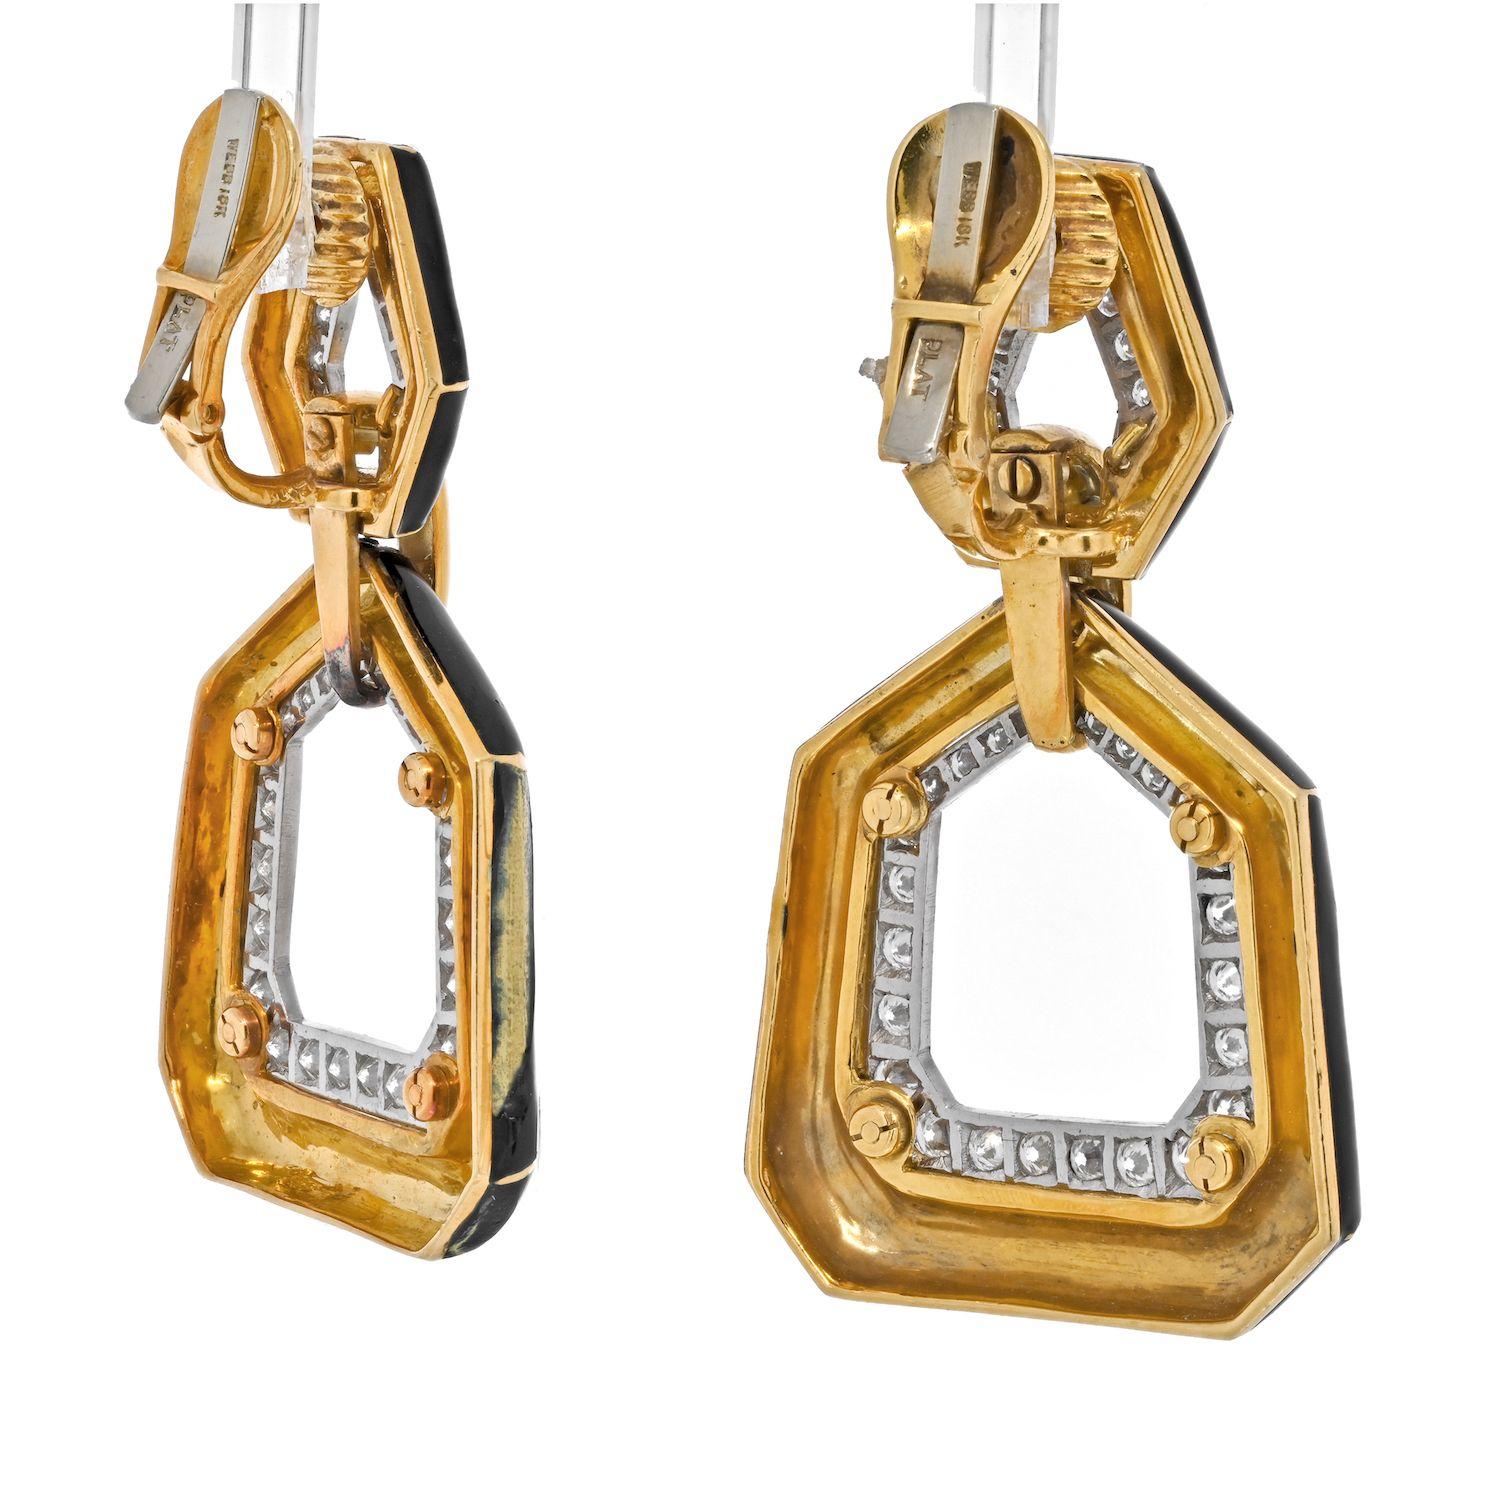 When looking for a pair of stunning door knocker-style earrings this is it! This pair from David Webb Bamboo collection will blow your mind: it is very special! In excellent condition these earrings feature beautiful diamonds and enameling. You will